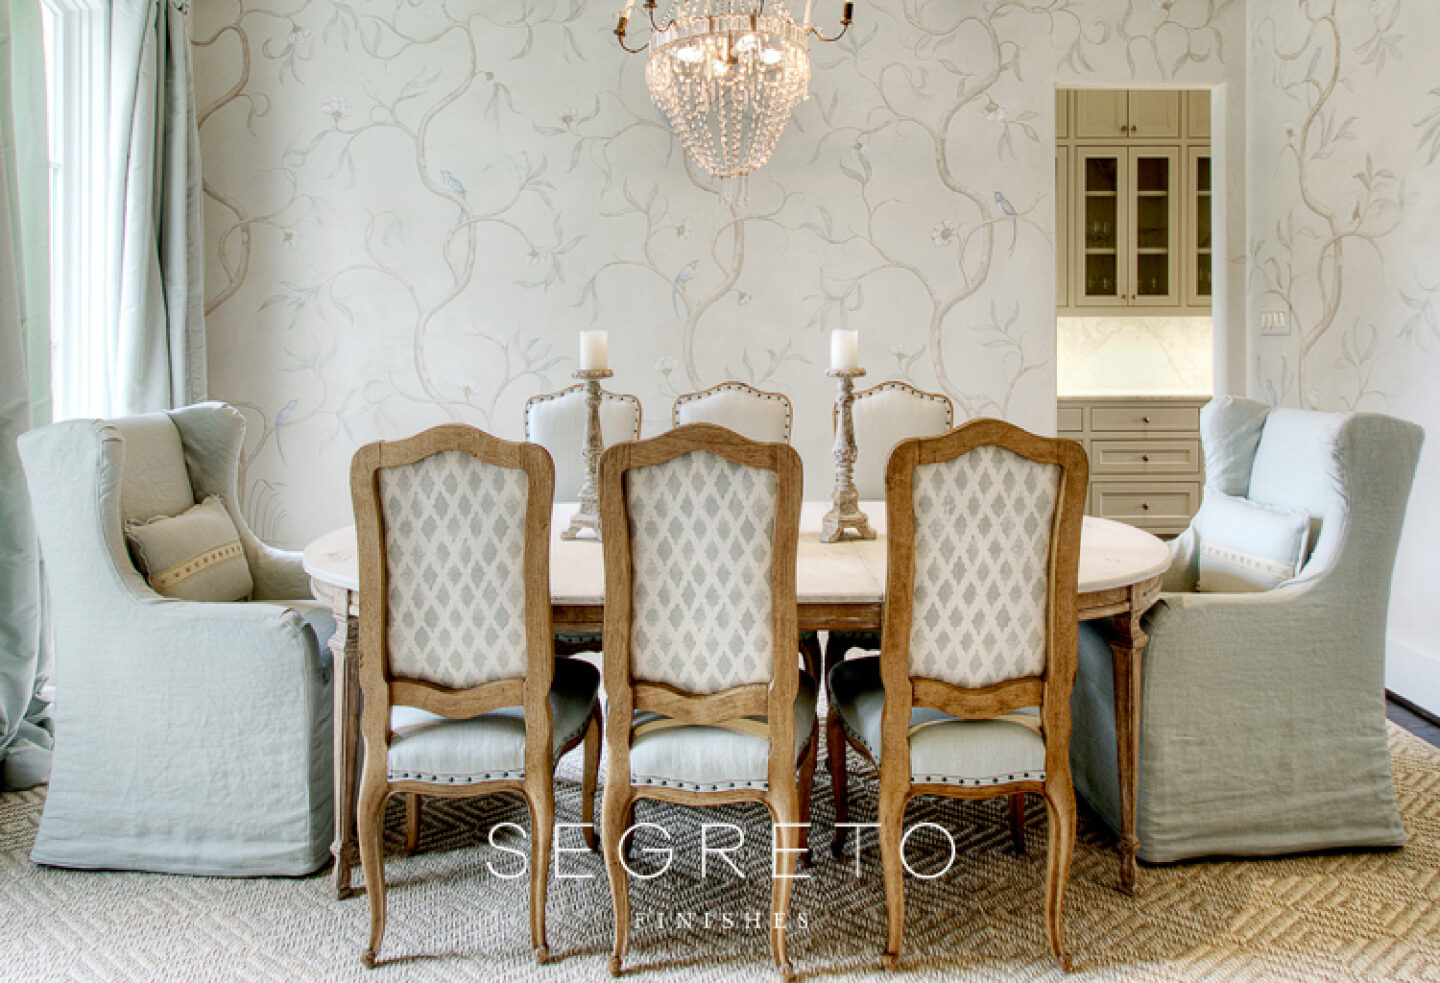 Lovely French country dining room with delicate, understated mural painted by Segreto Finishes.